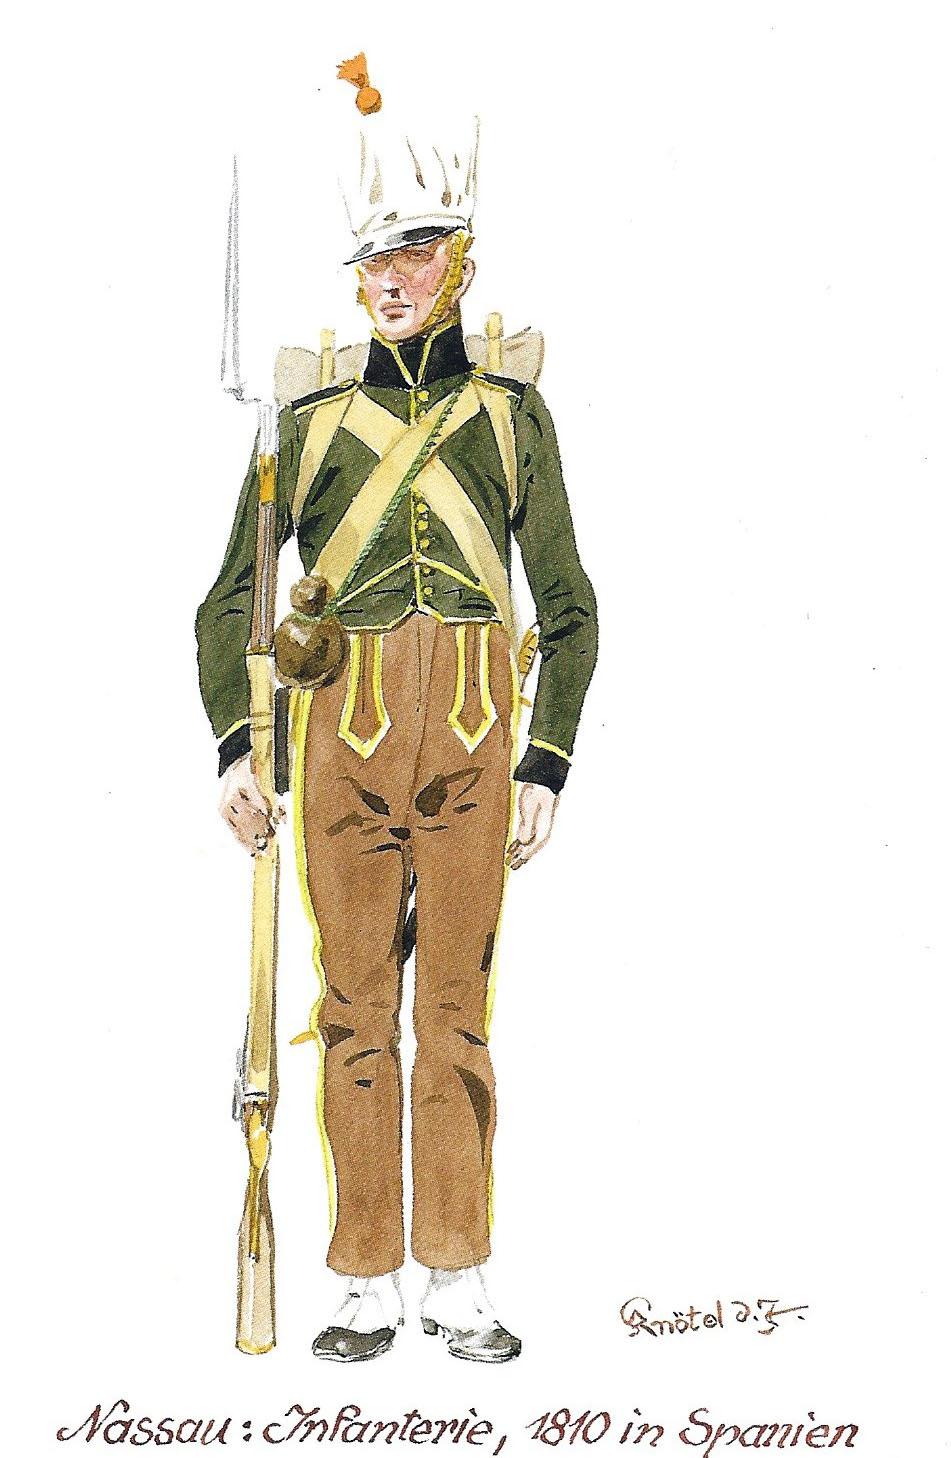 They had French -styled shakoes without cords (although some sources mention white cords) but with brass straps, a black cockade and a plume "a flamme" of the colour of the company (1st yellow, 2nd